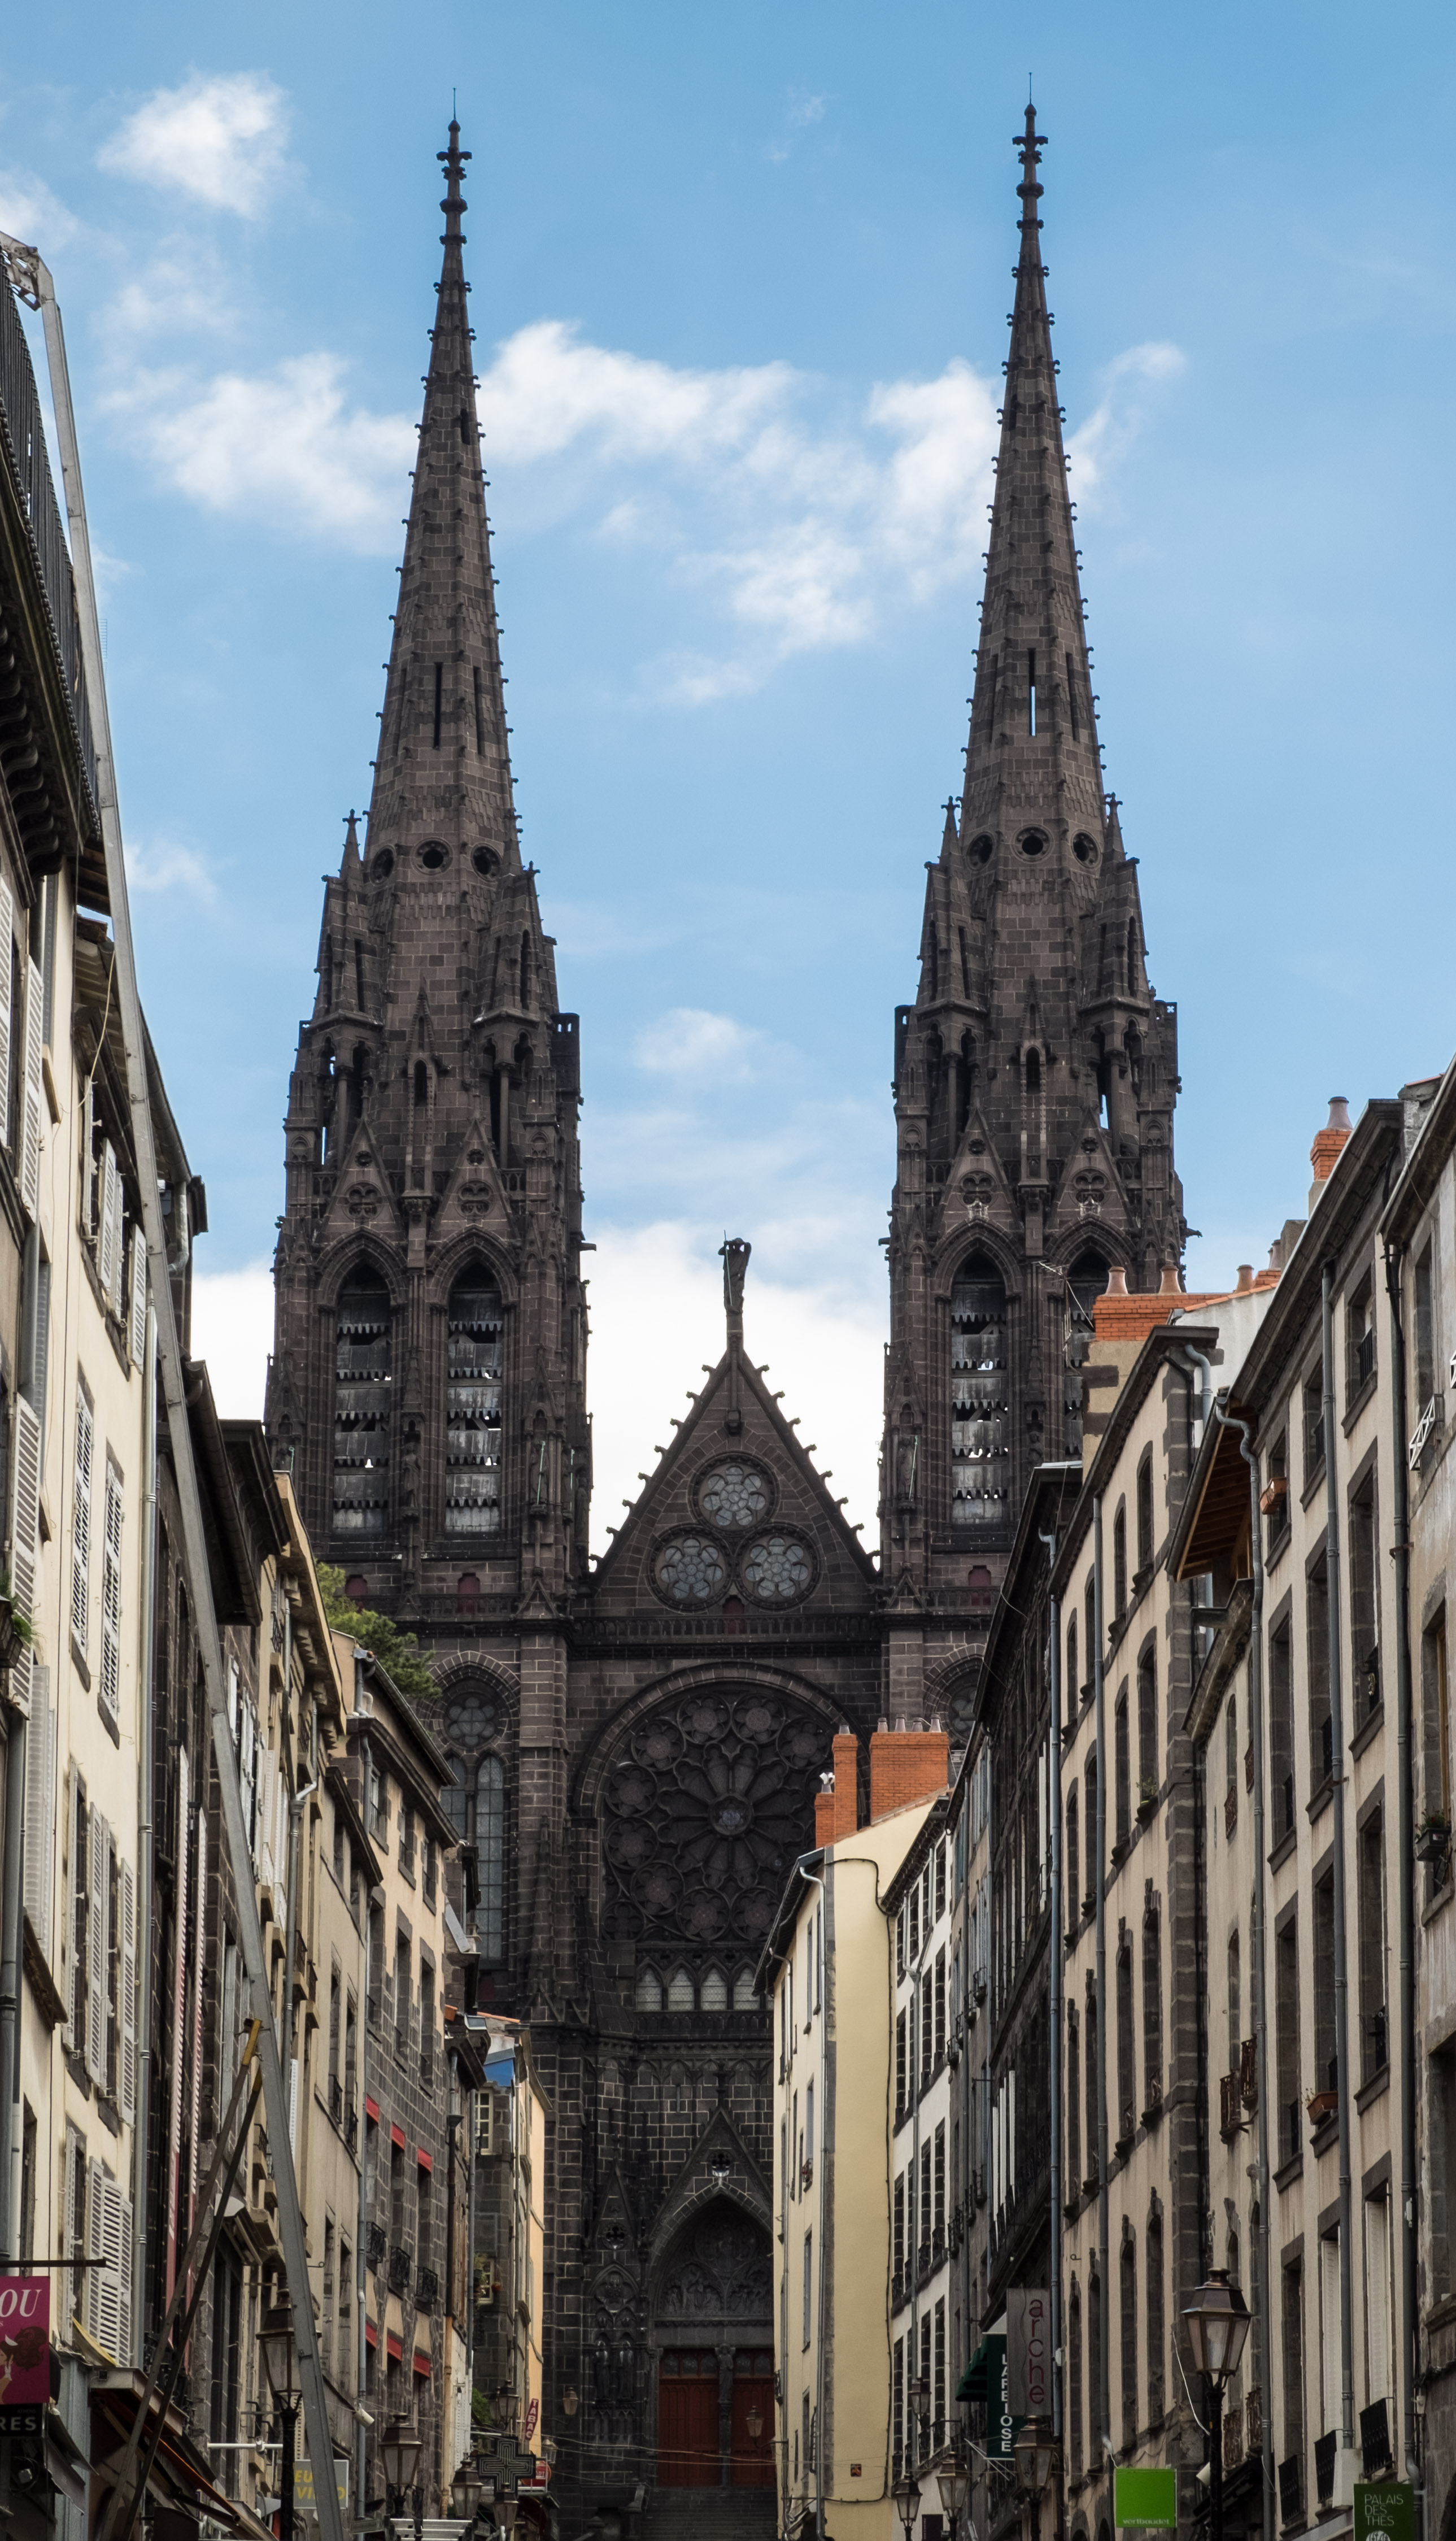 Clermont-Ferrand in Central France